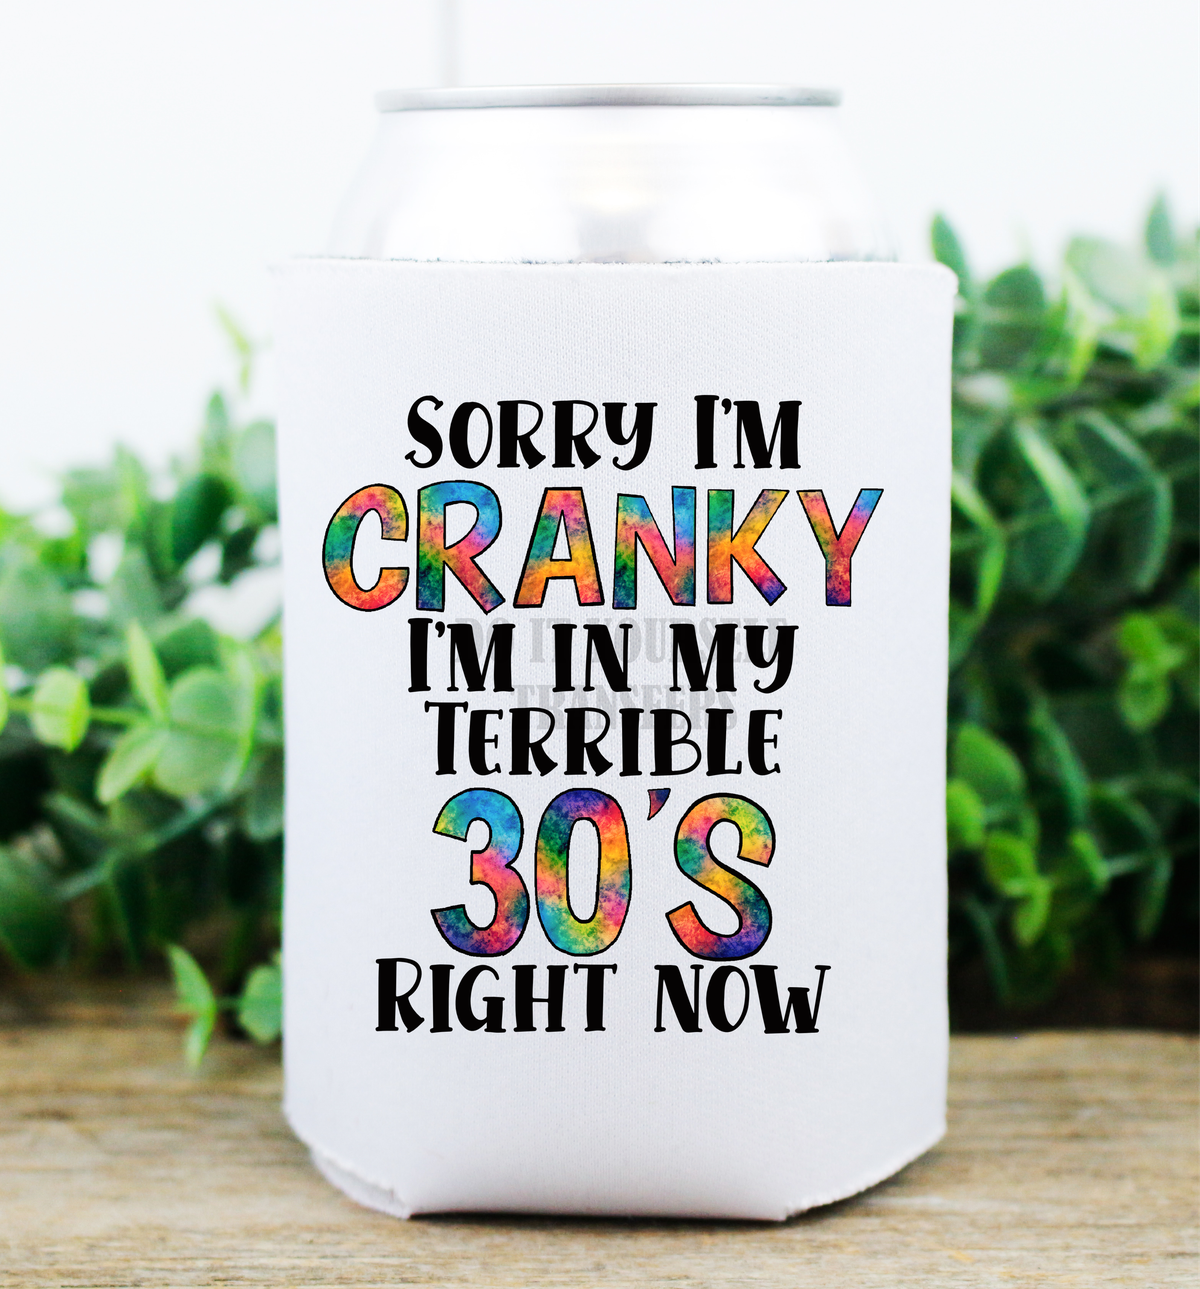 Sorry I'm cranky I'm in my terible 30's right now  / size  DTF TRANSFERPRINT TO ORDER